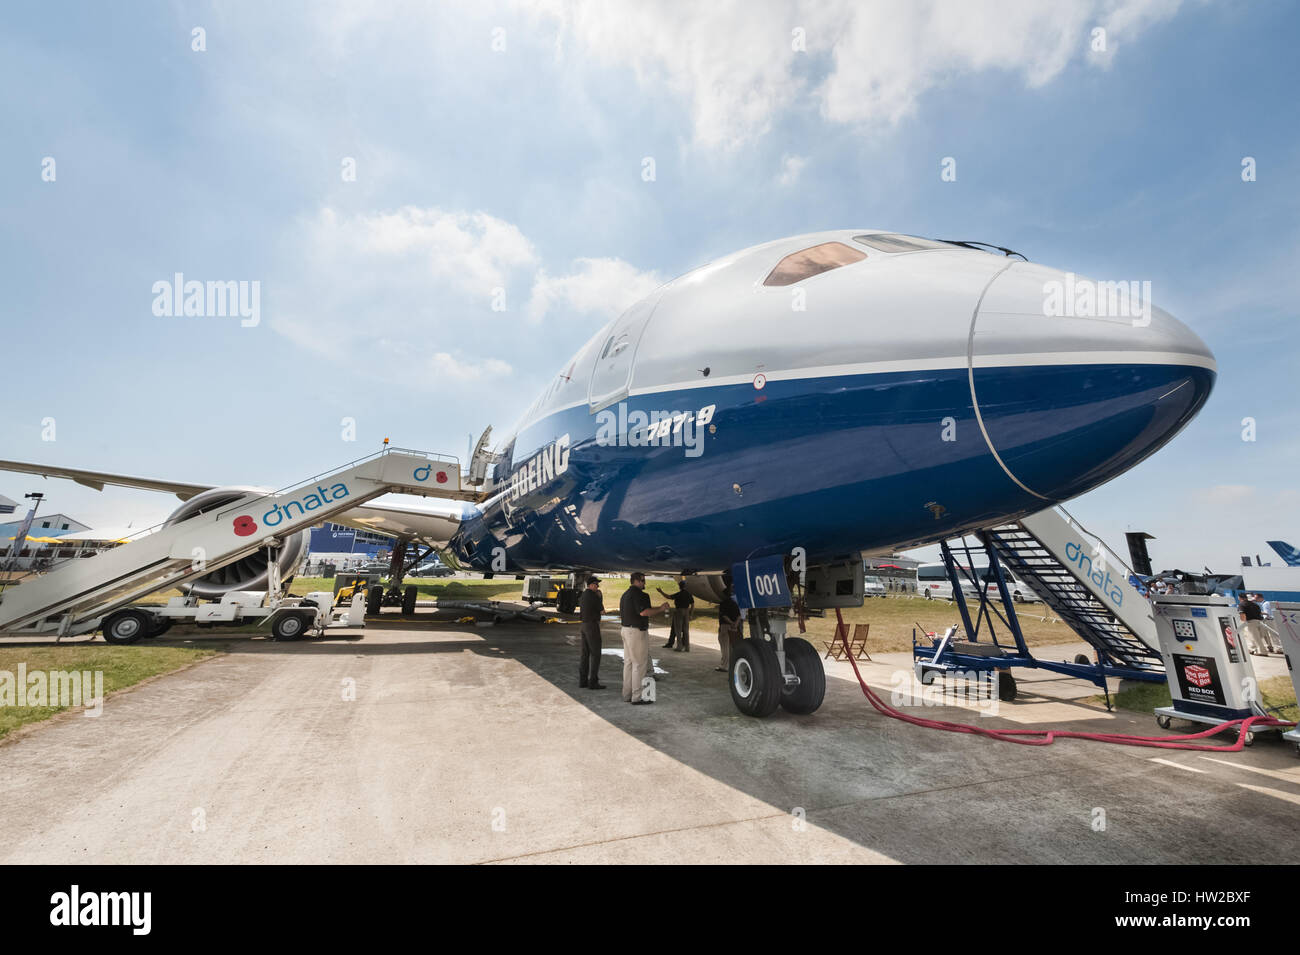 Wide-angle abstract of the new Boeing 787-9 Dreamliner airliner on static display at the Farnborough airshow, UK Stock Photo